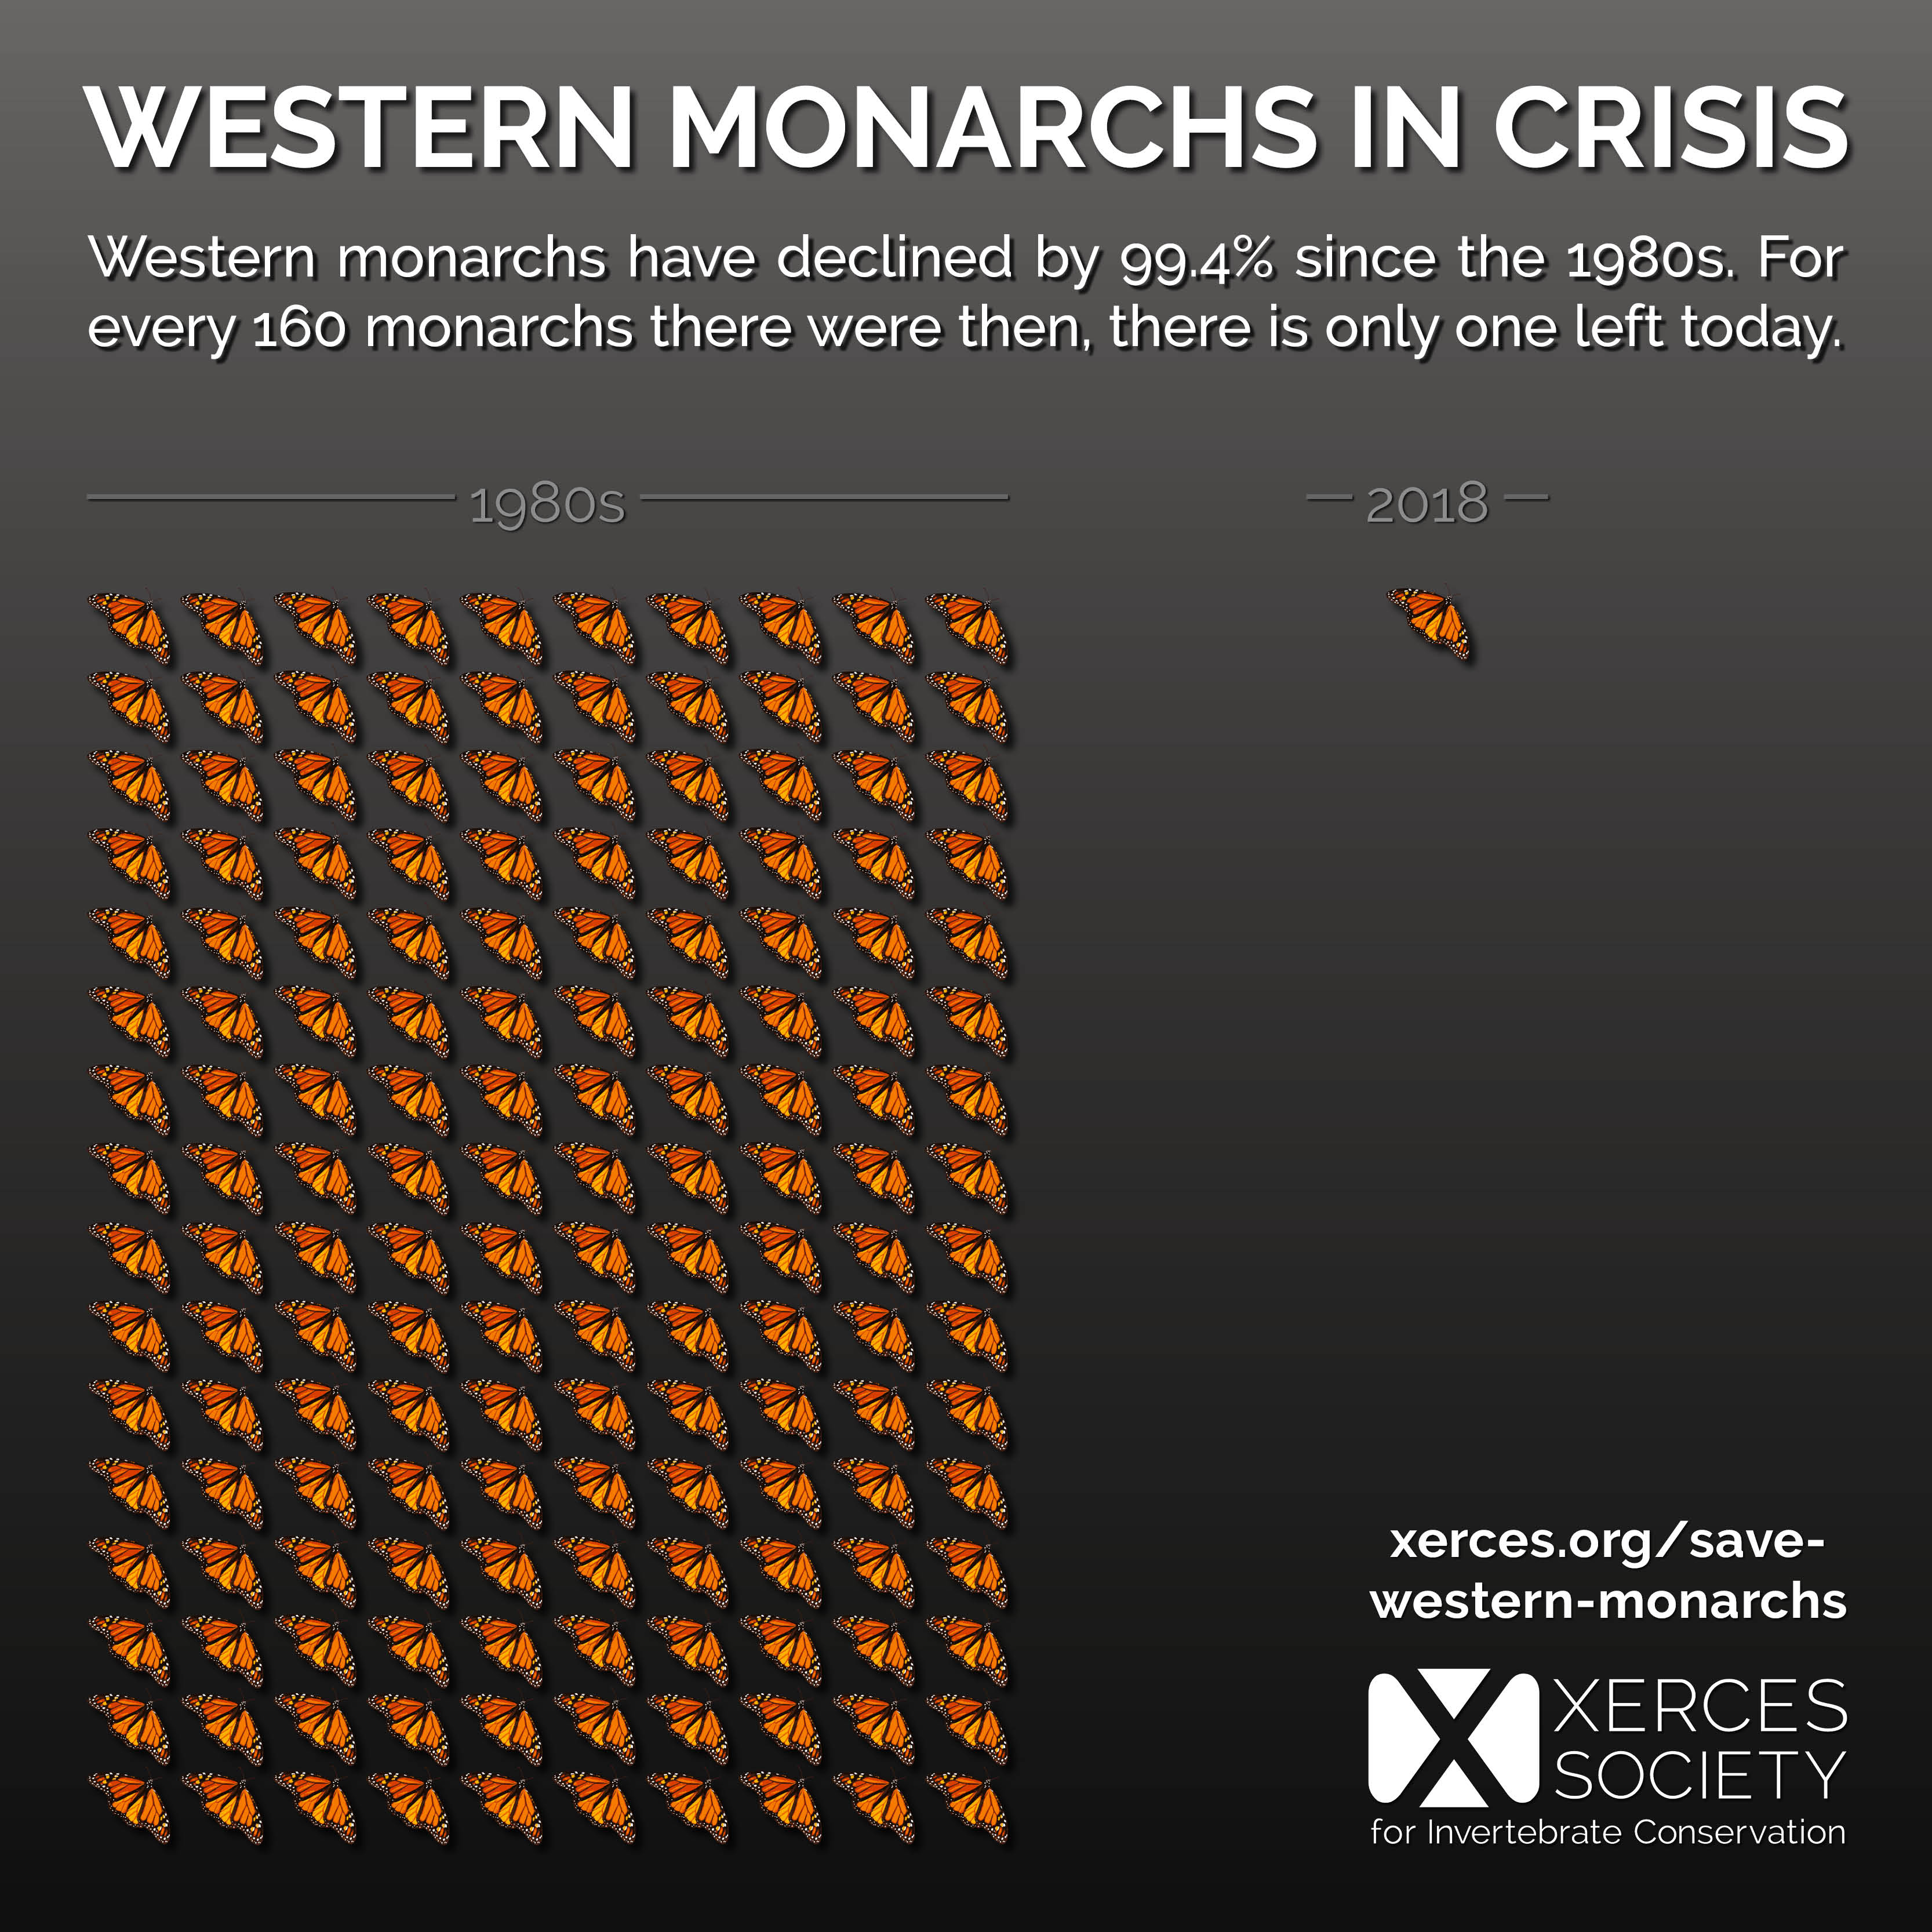 This graphic shows that the western monarch population is 1/160 the size it was in the 1980s.